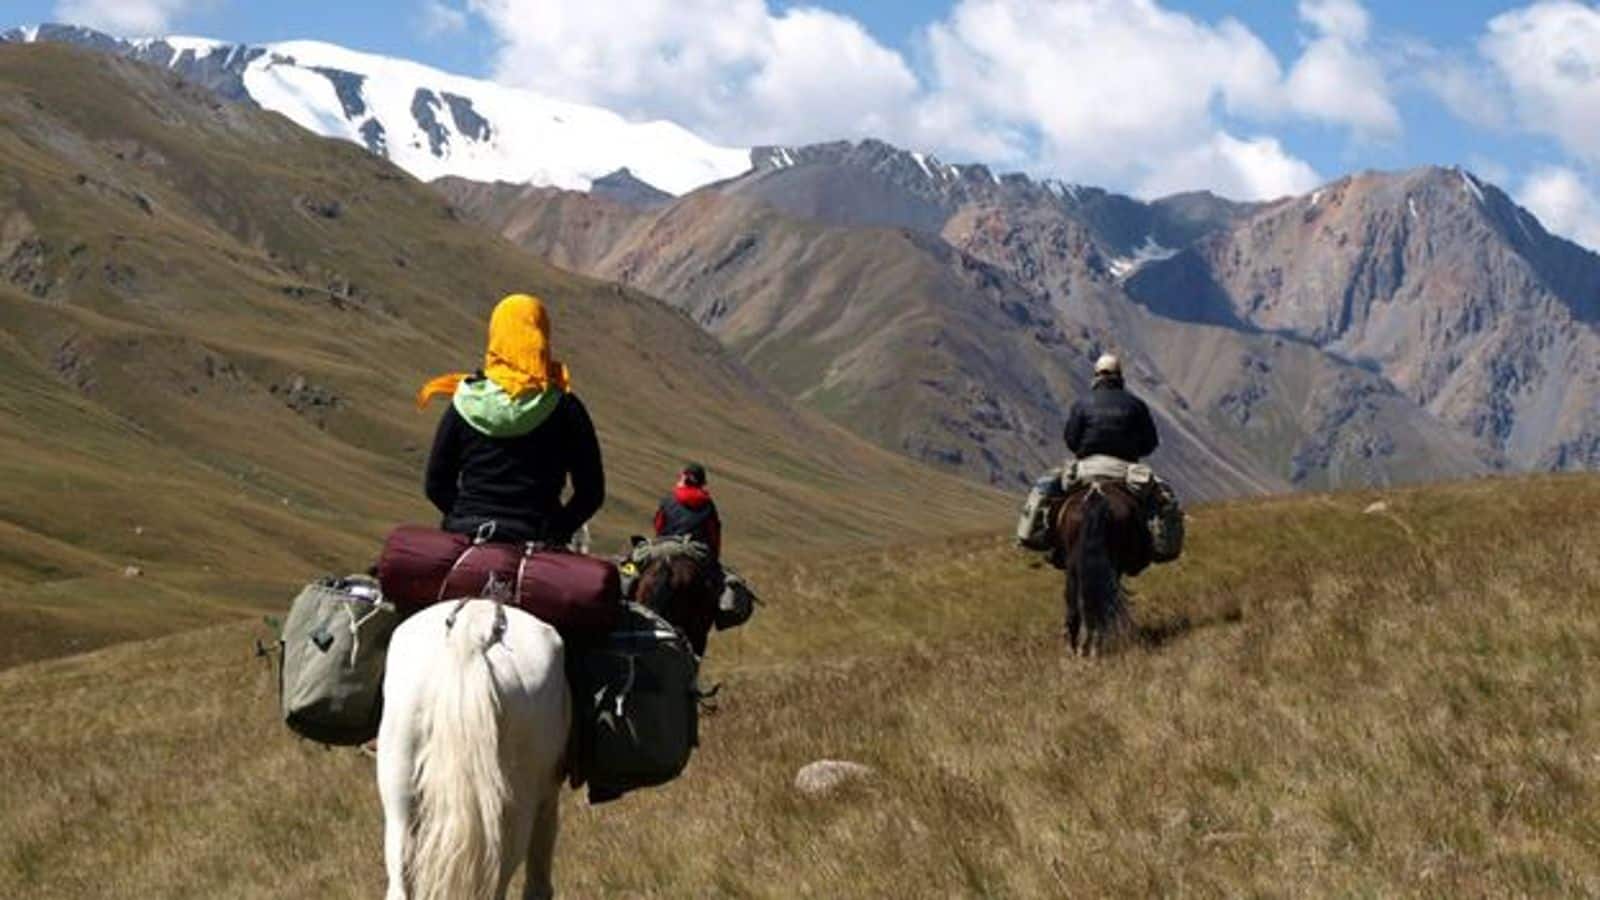 Trekking the Silk Road in Kyrgyzstan: What to expect